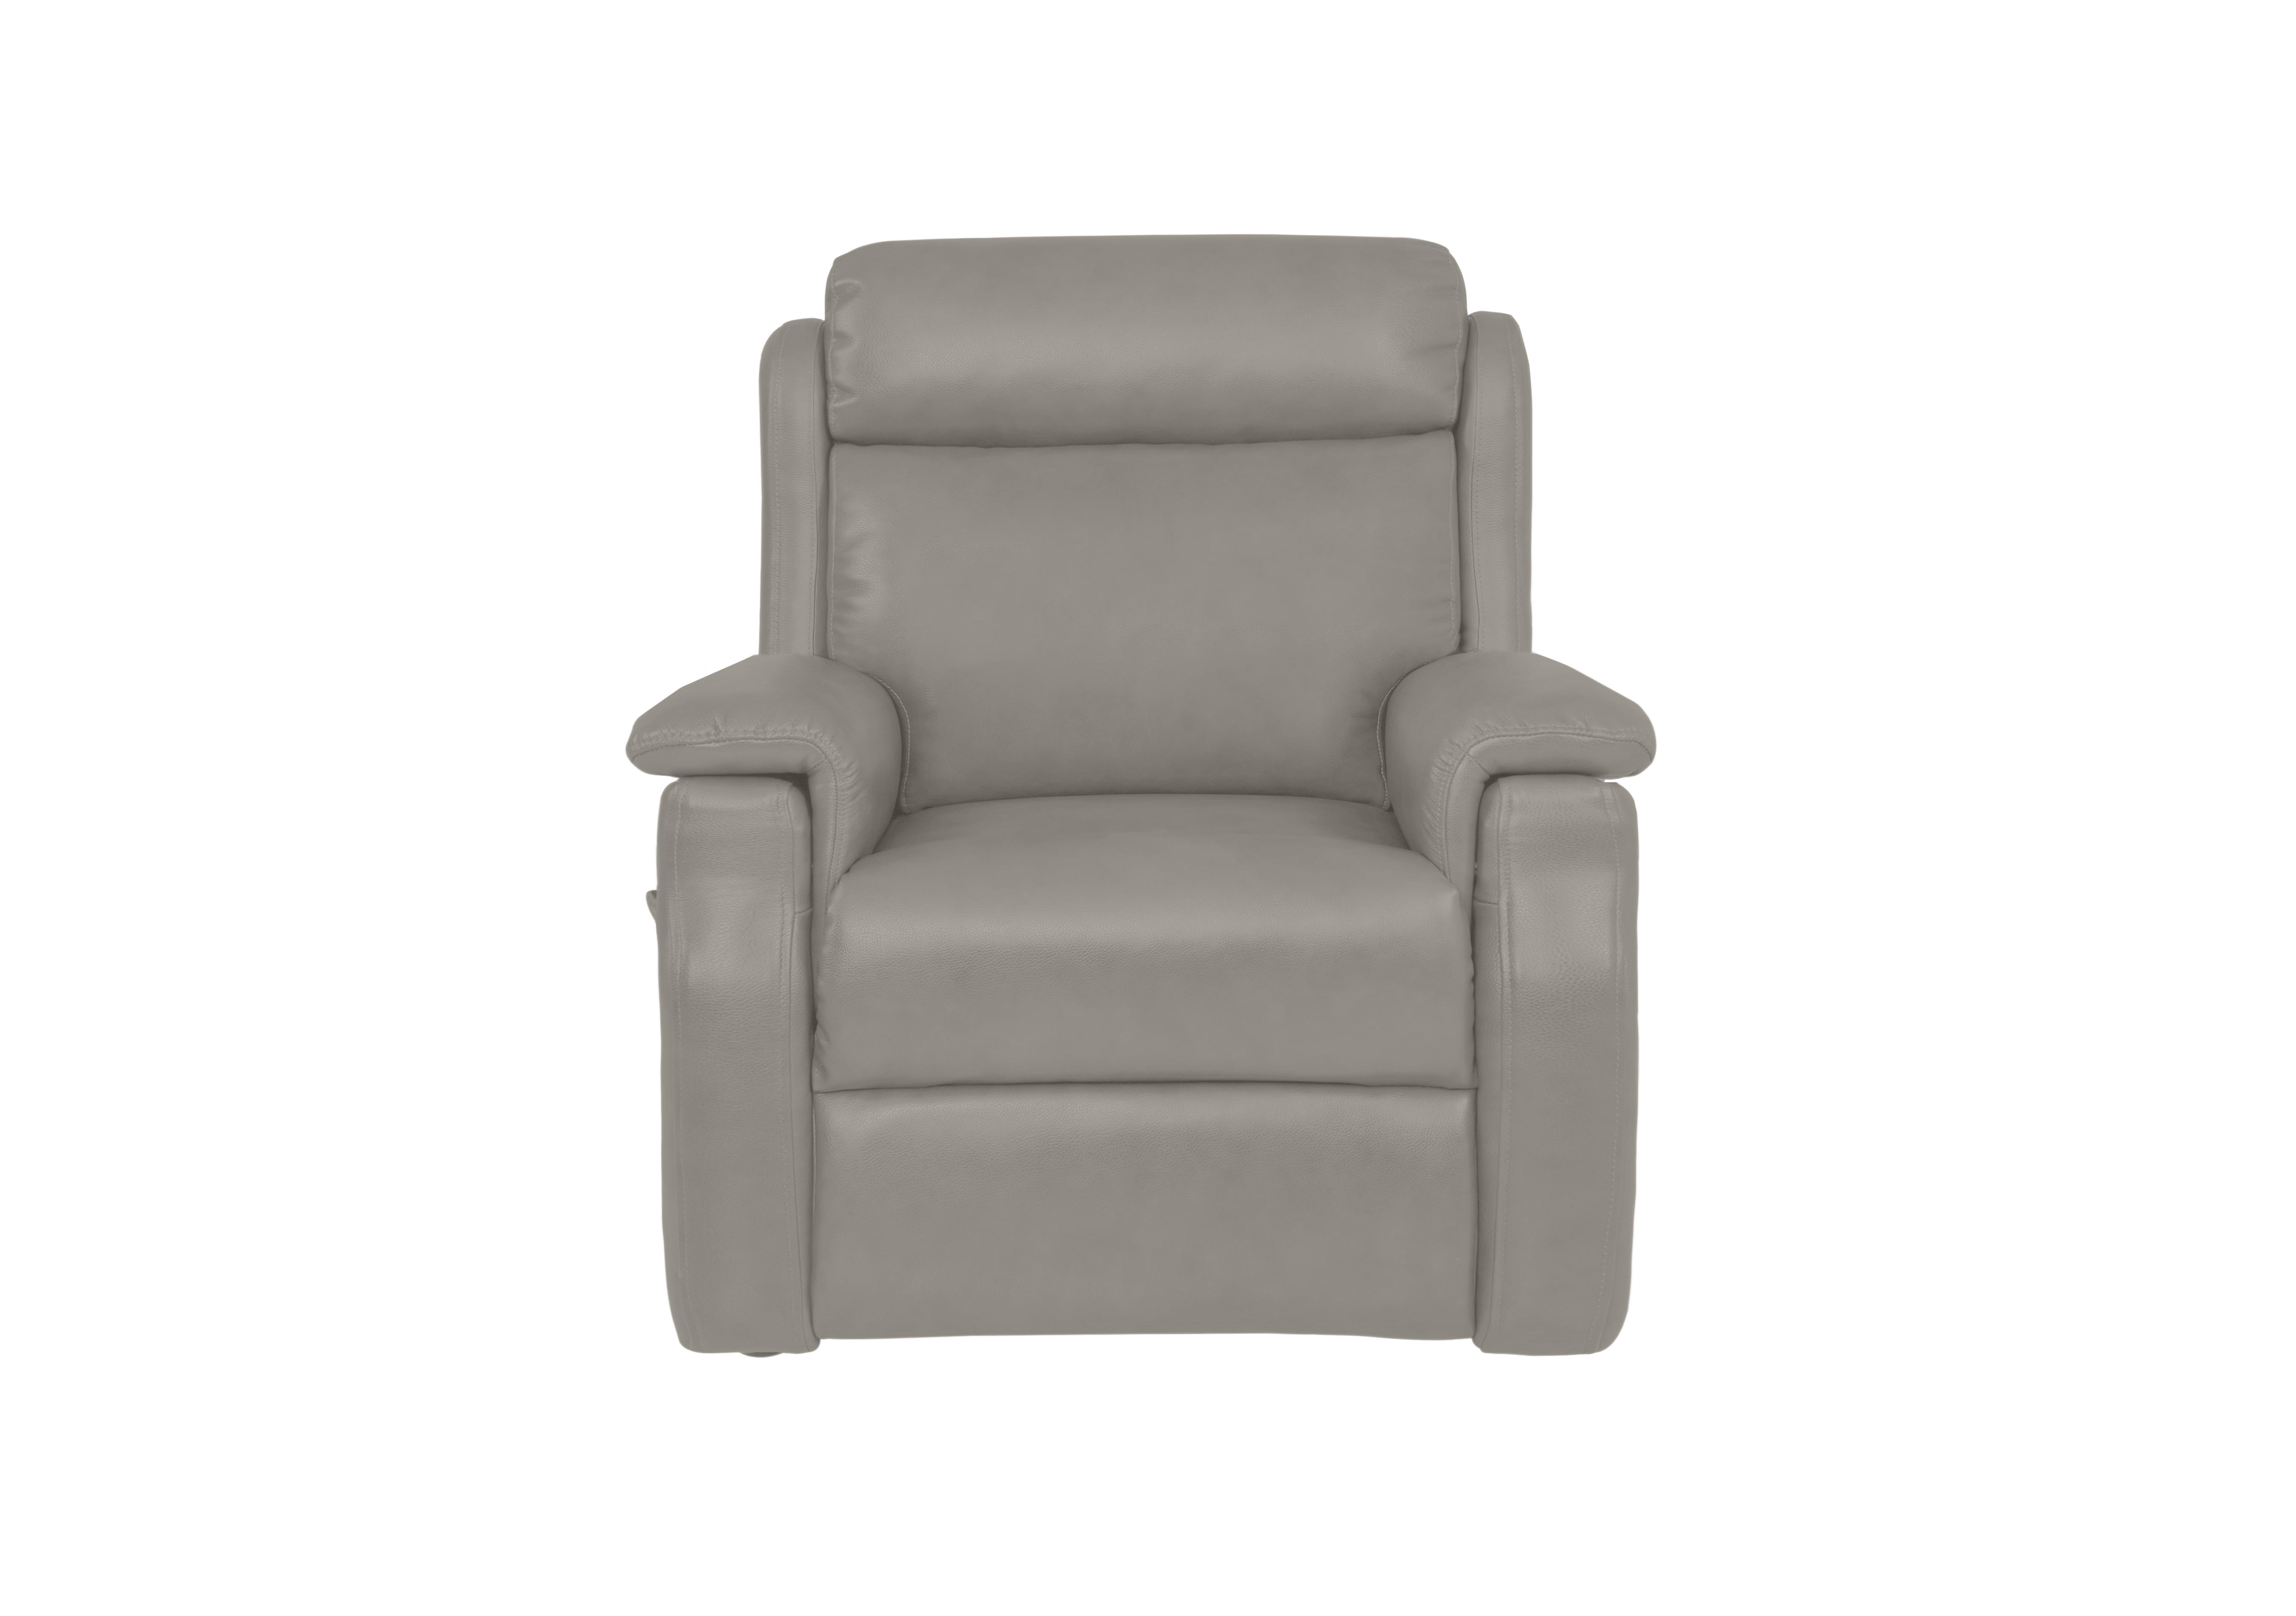 My Chair Kirk Leather Lift and Rise Chair in Cat-60/28 Montana New Grey on Furniture Village